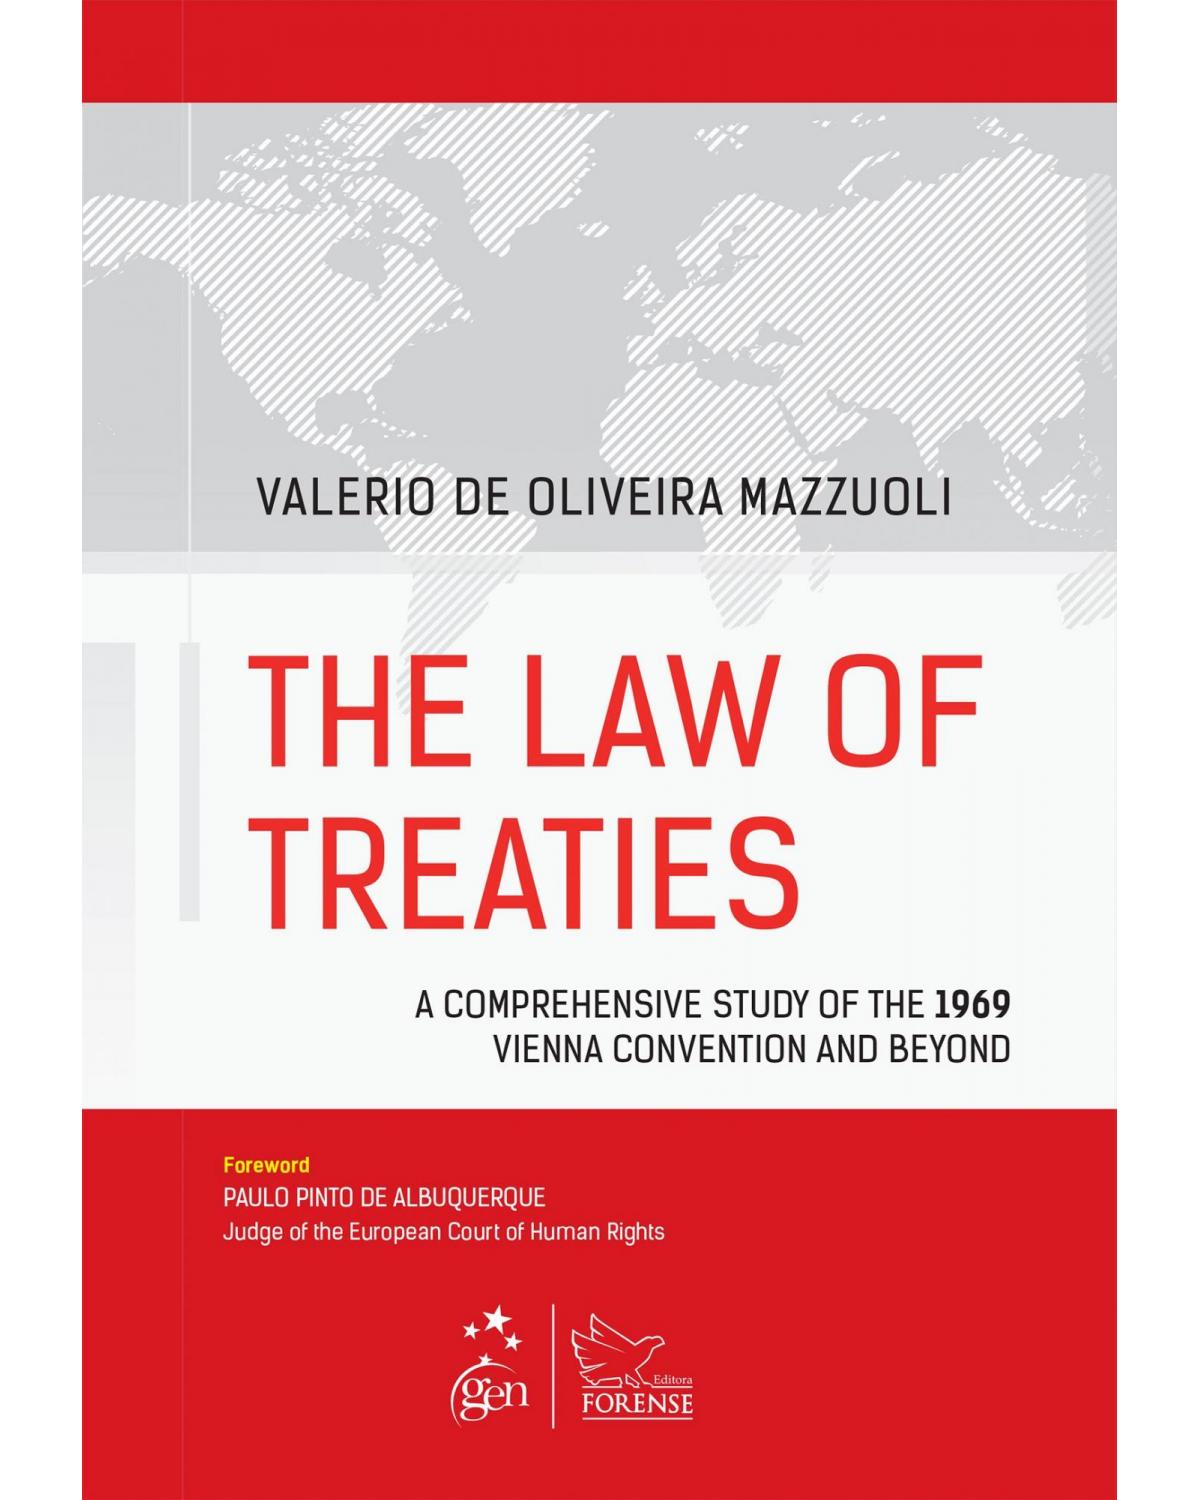 The law of treaties - A comprehensive study of the 1969 Vienna Convention and beyond - 1ª Edição | 2016